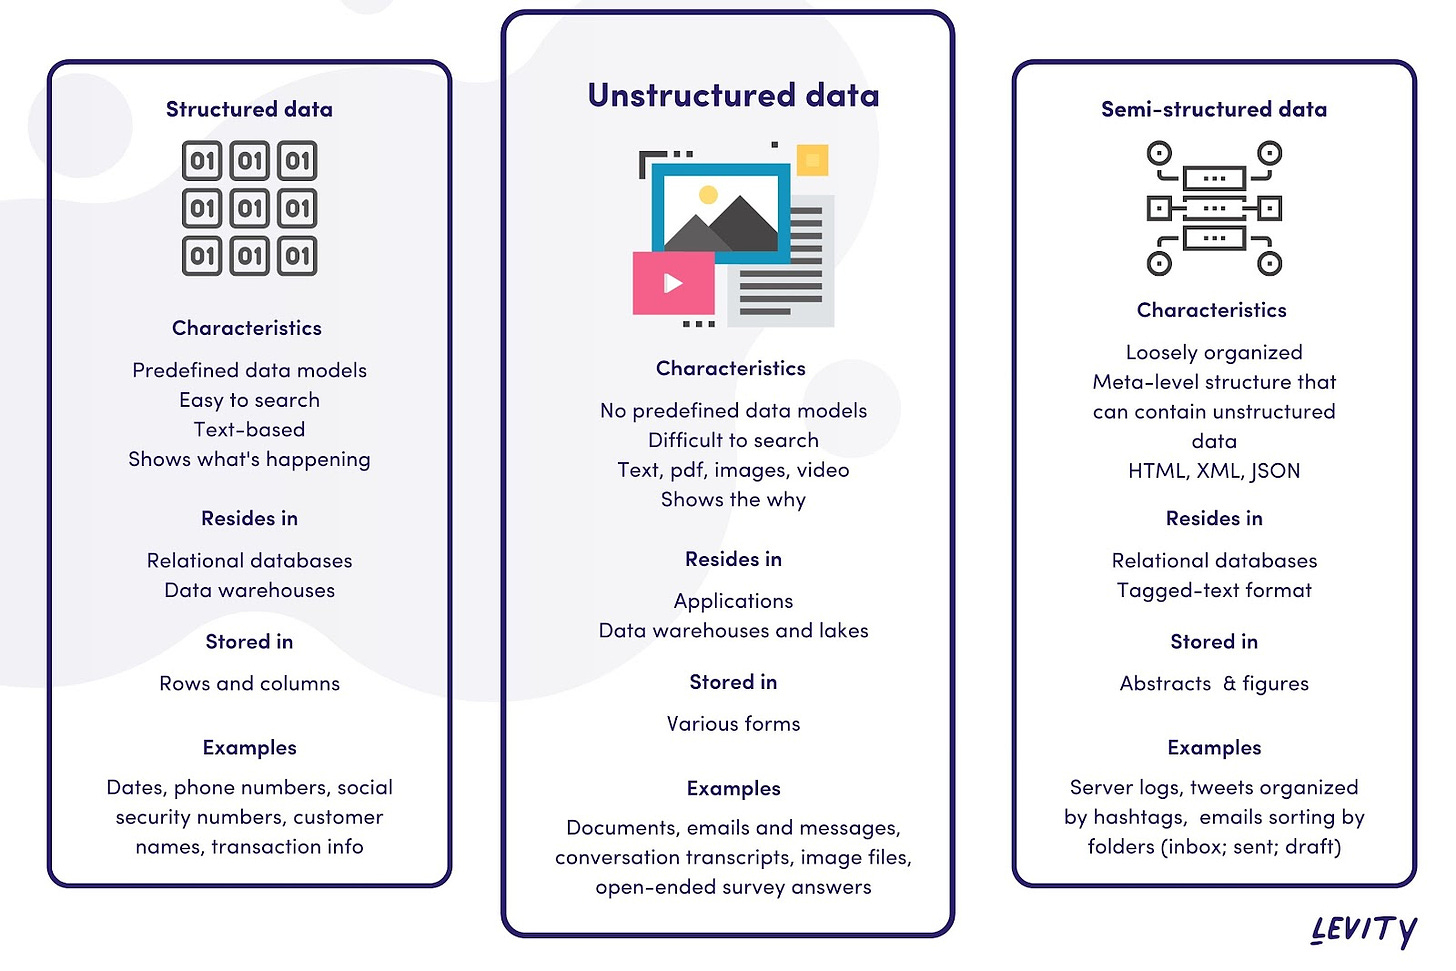 Data Types and Applications: Structured vs Unstructured Data